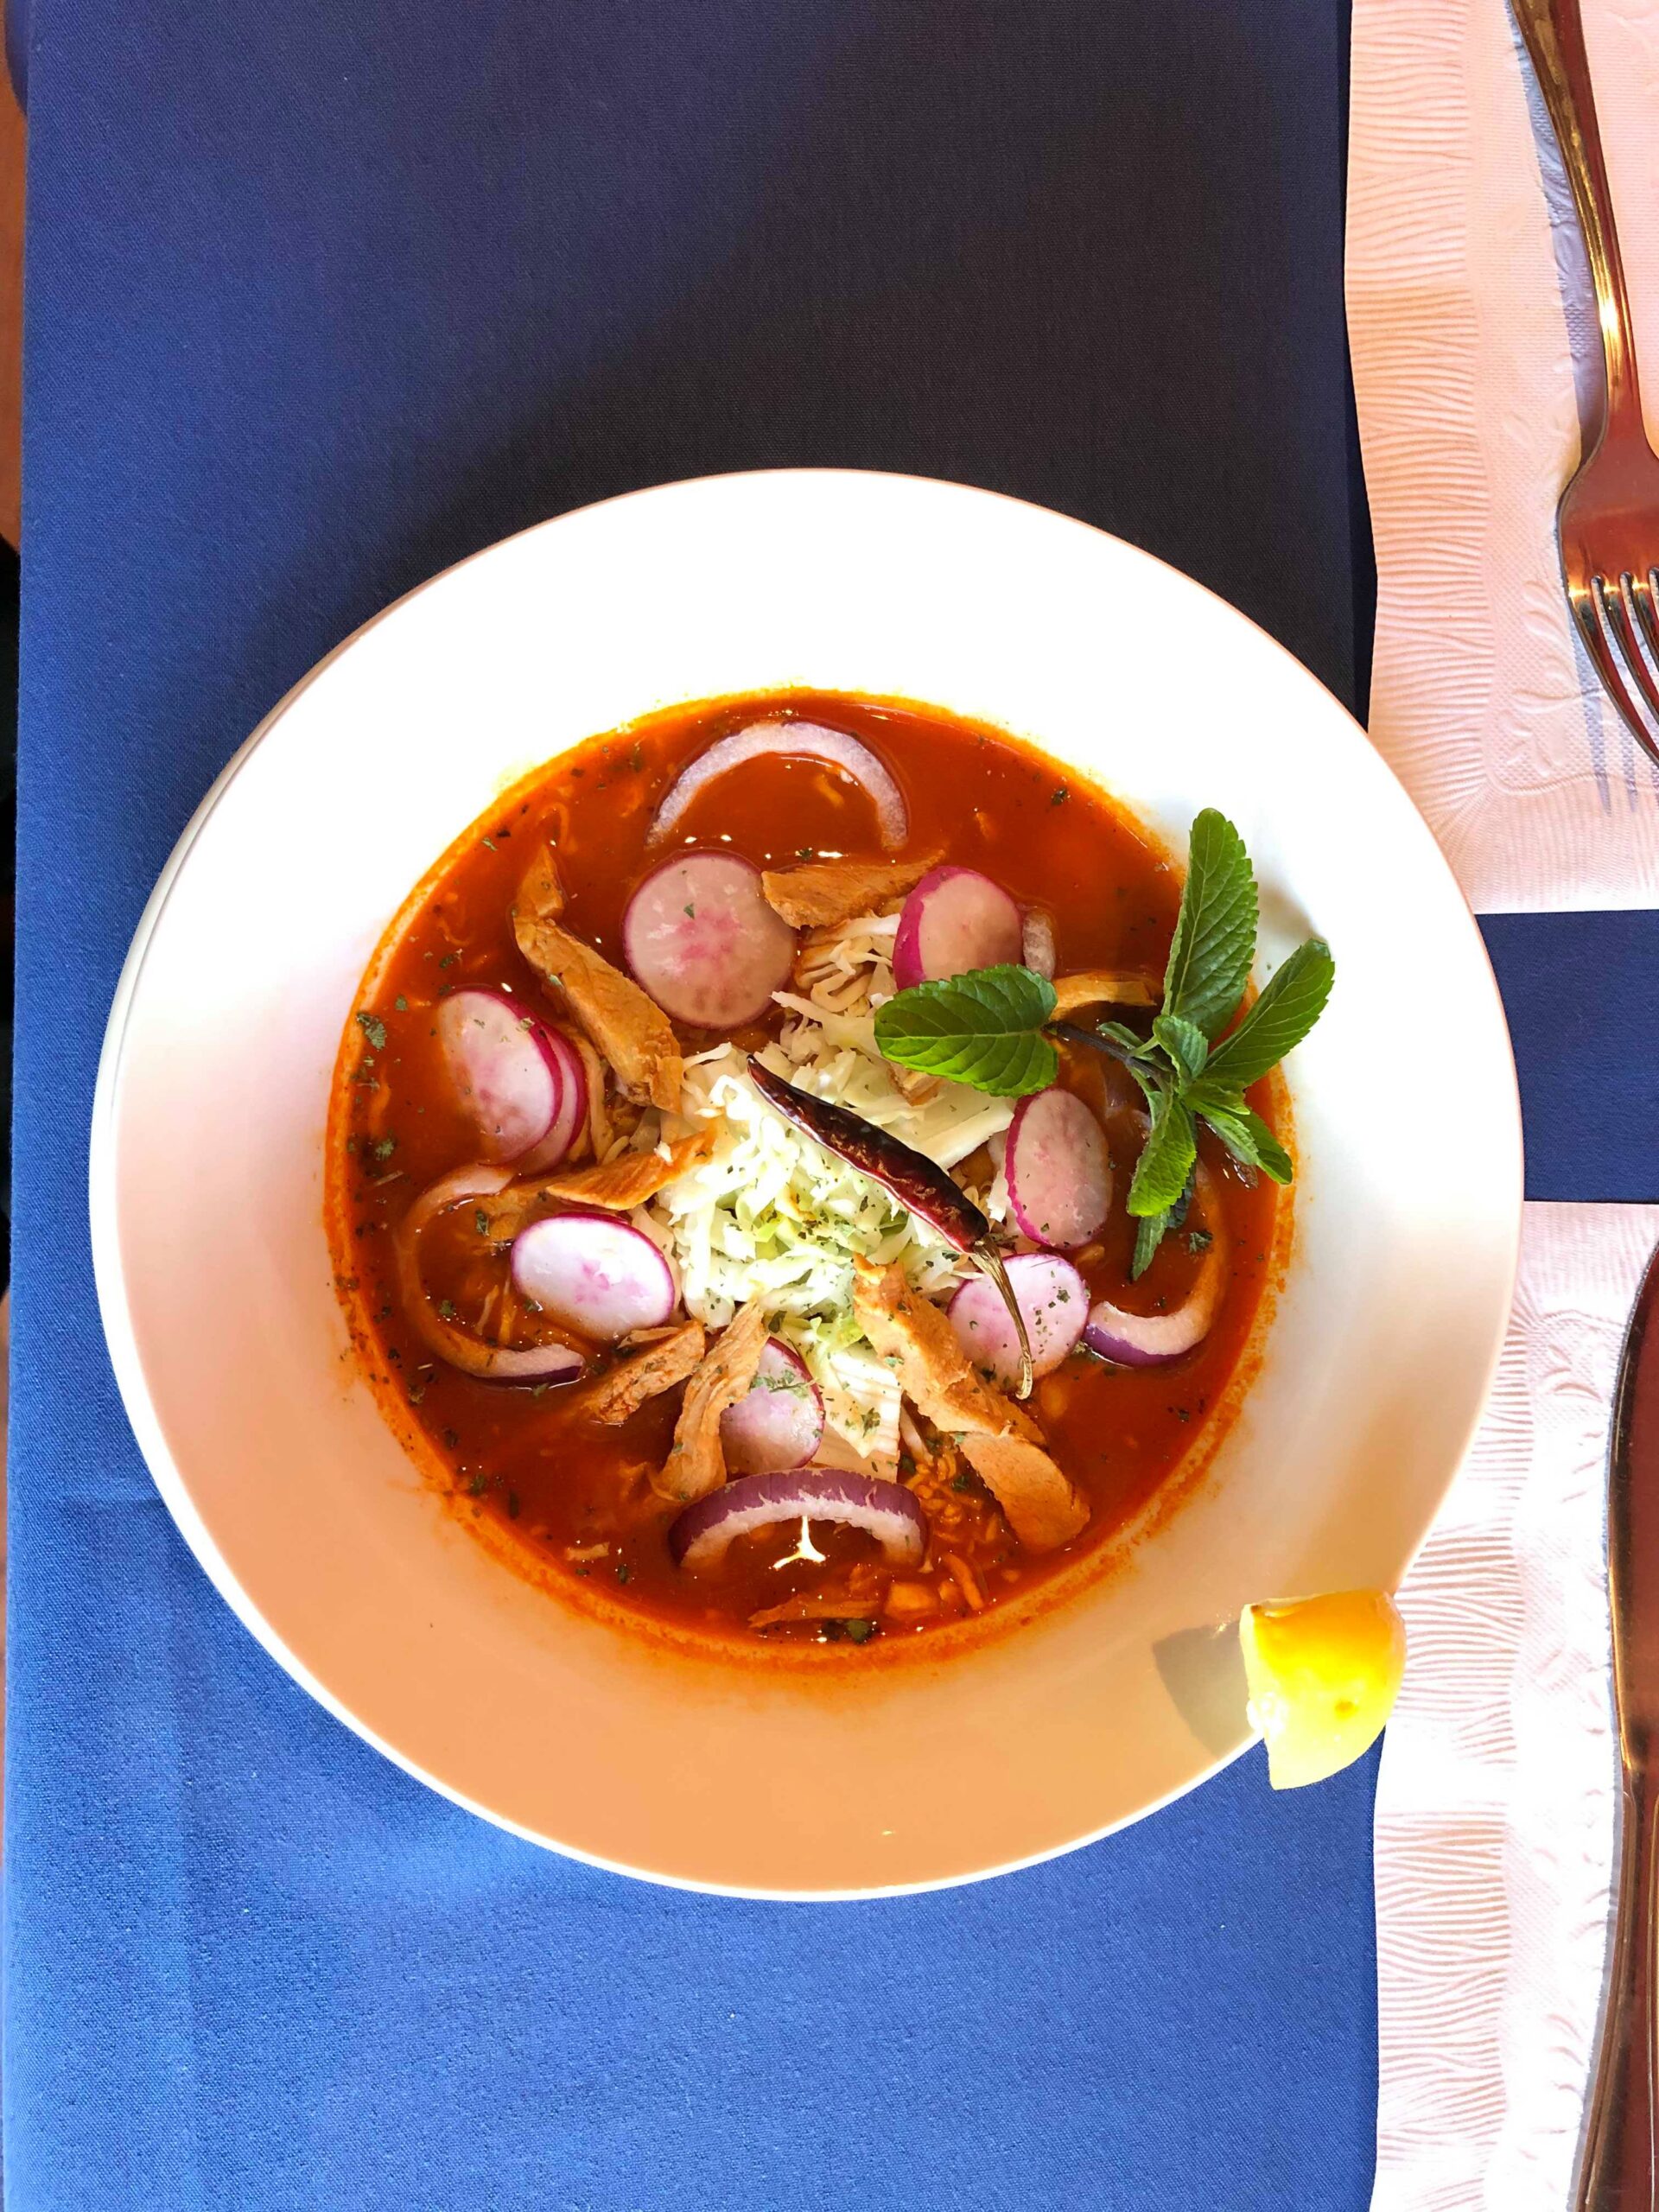 RED POZOLE